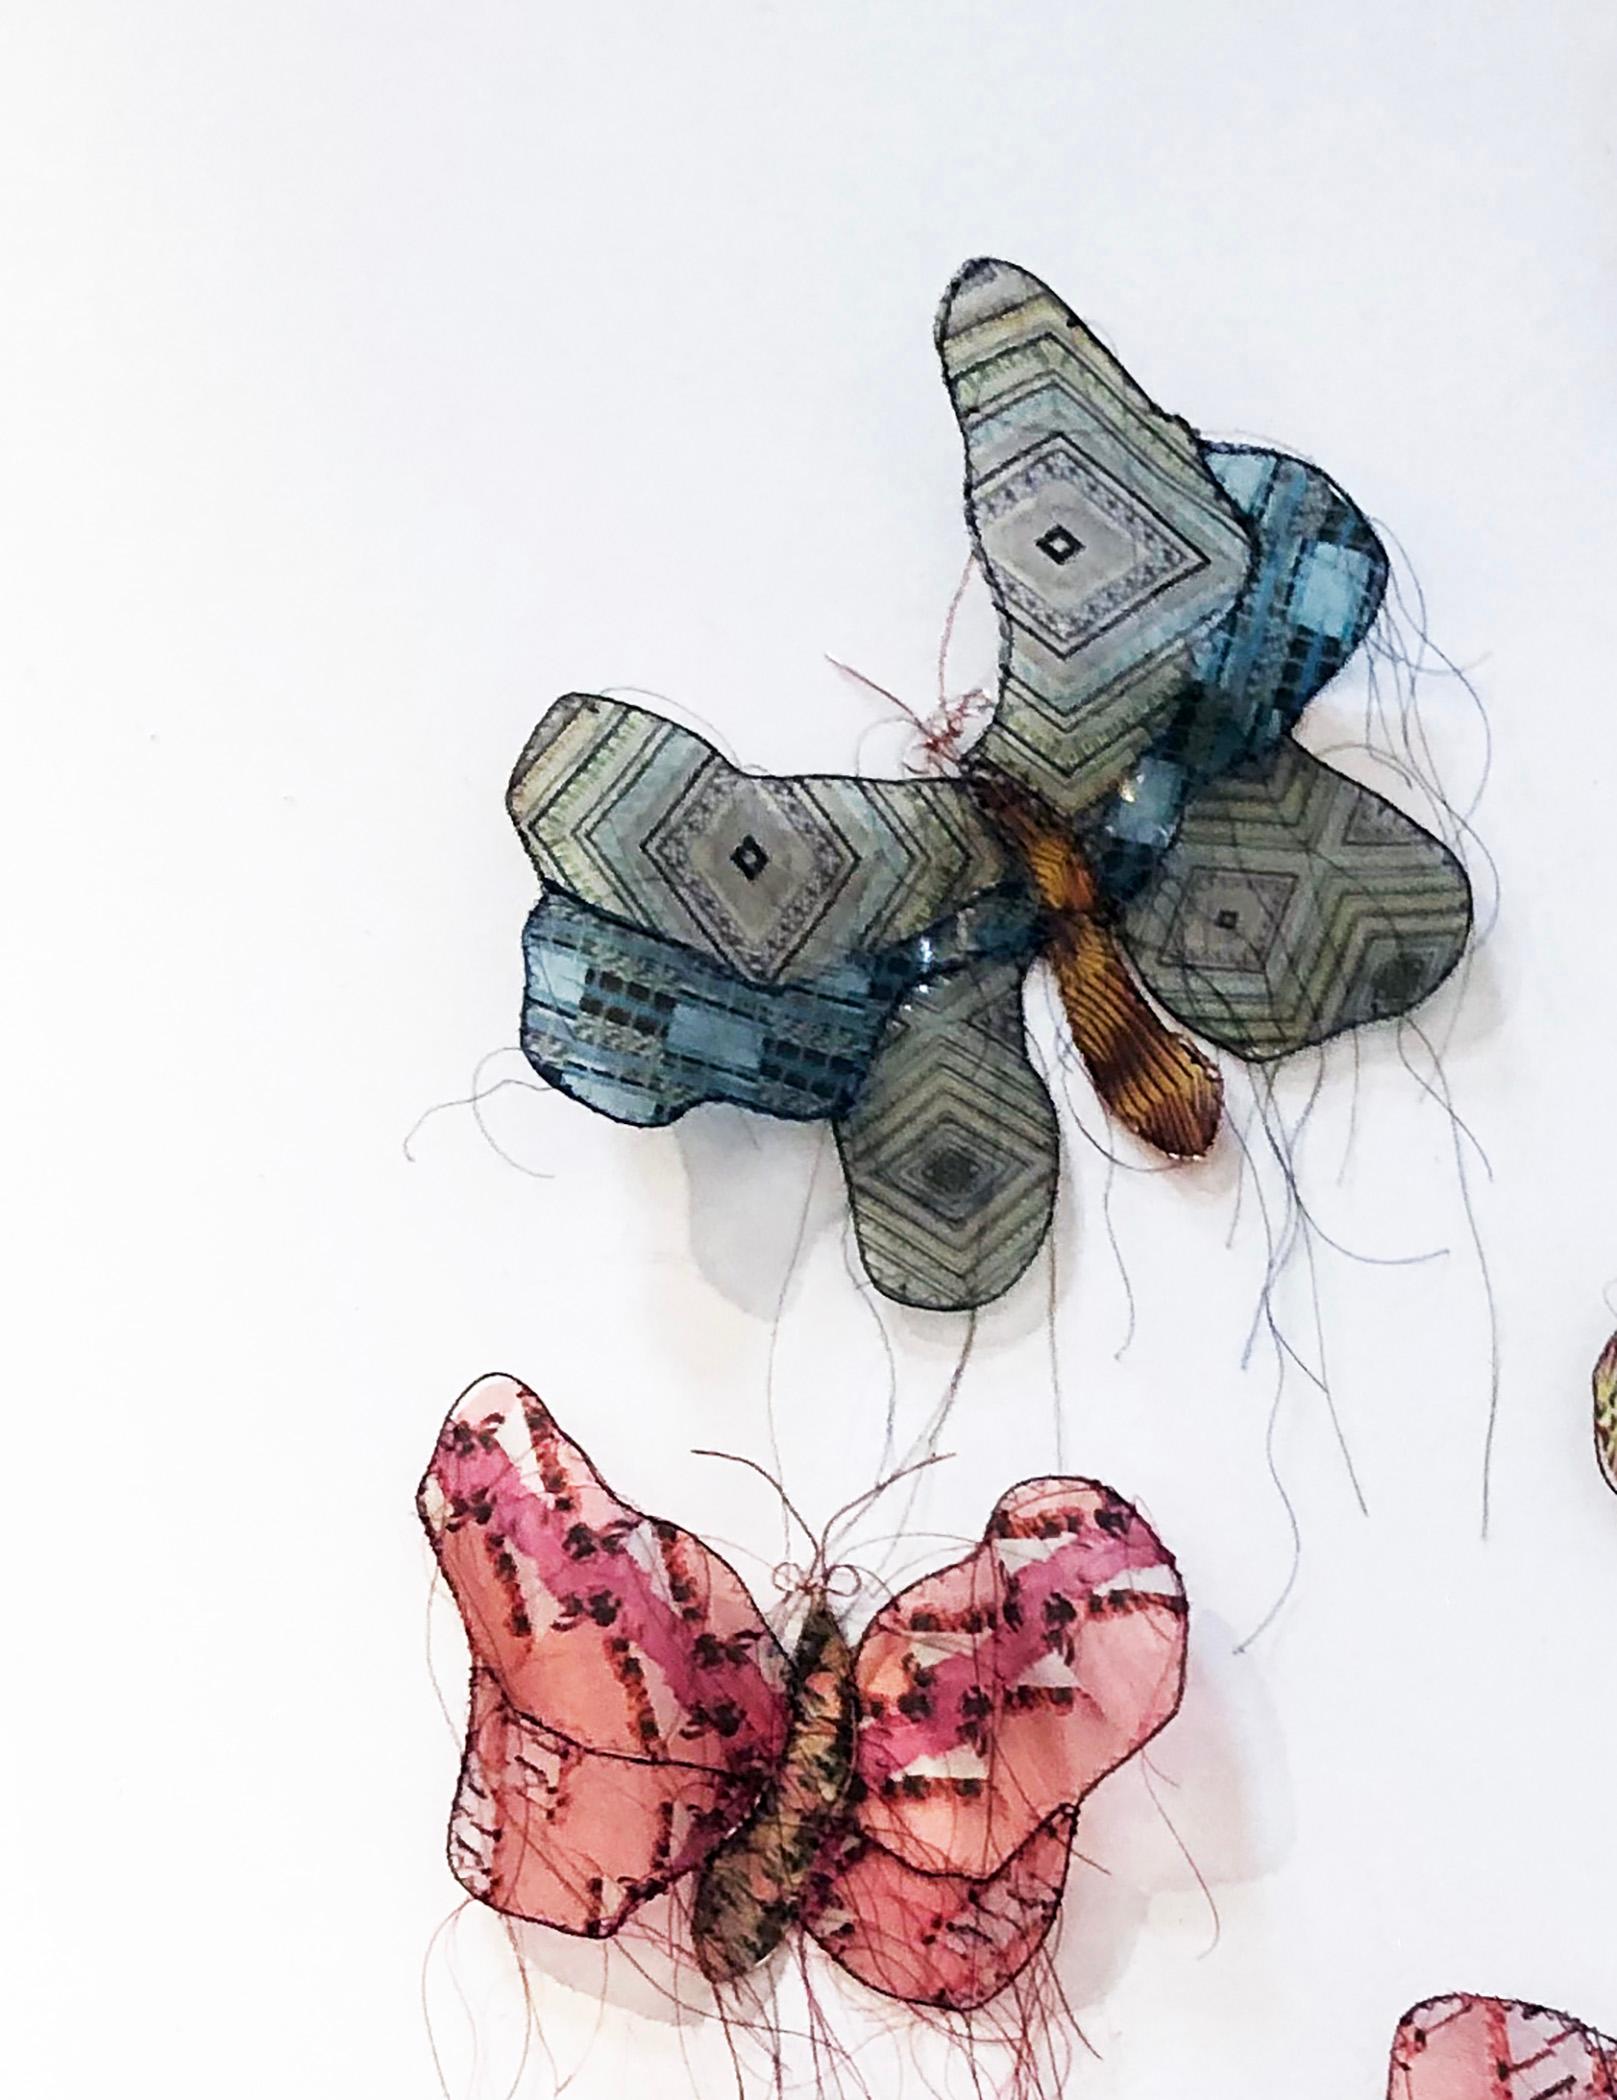 Eight Butterflies
40.0 x 32.0 x 1.5, 1.0 lbs 
Mixed Media
Hand signed by artist 

Artist's Commentary: 
